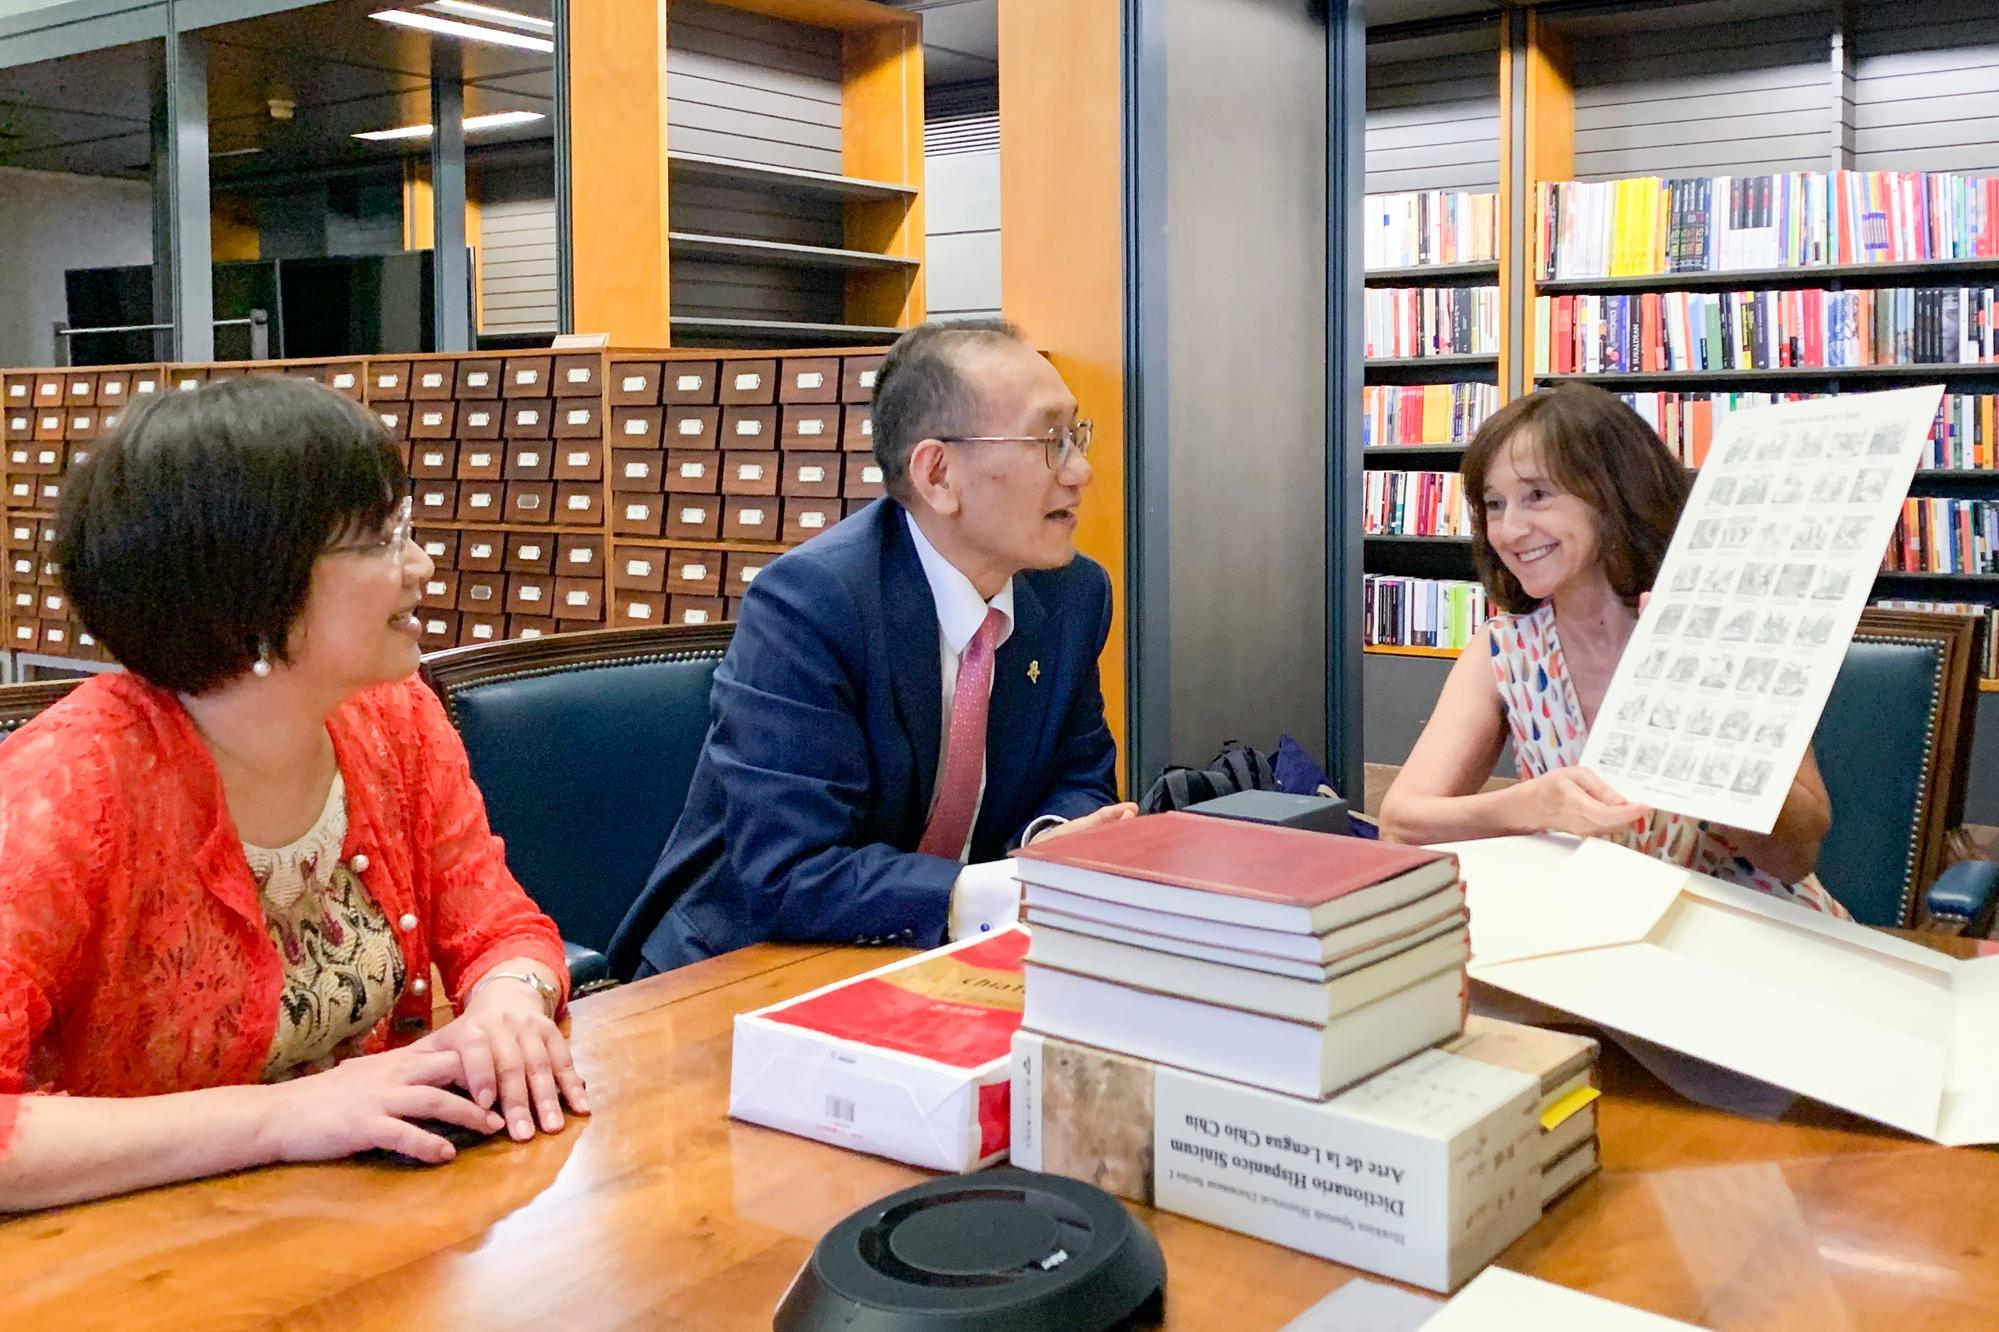 Ambassador José María Liu (劉德立) (middle) of the Republic of China (Taiwan) gifted the Hokkien Spanish Historical Document Series to the National Library of Spain. The library director, Ana Santos Aramburo, reciprocated by presenting Liu with precious copies of ancient documents from the library's collection.